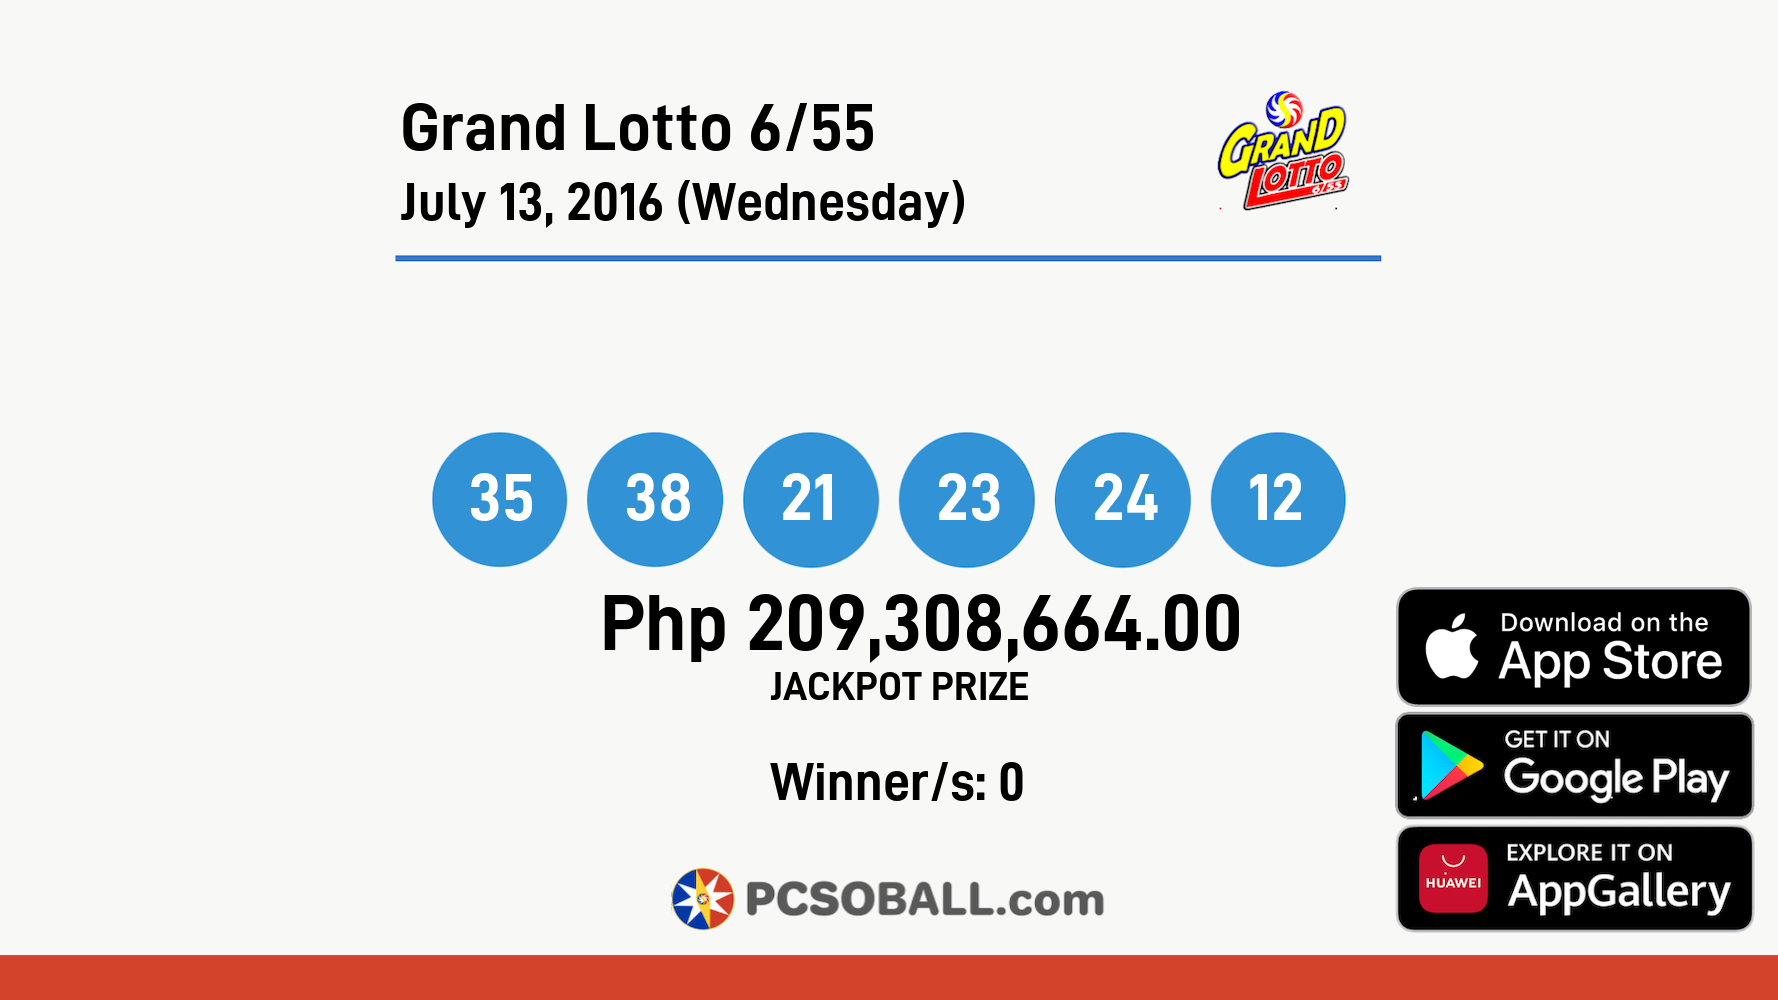 Grand Lotto 6/55 July 13, 2016 (Wednesday) Result